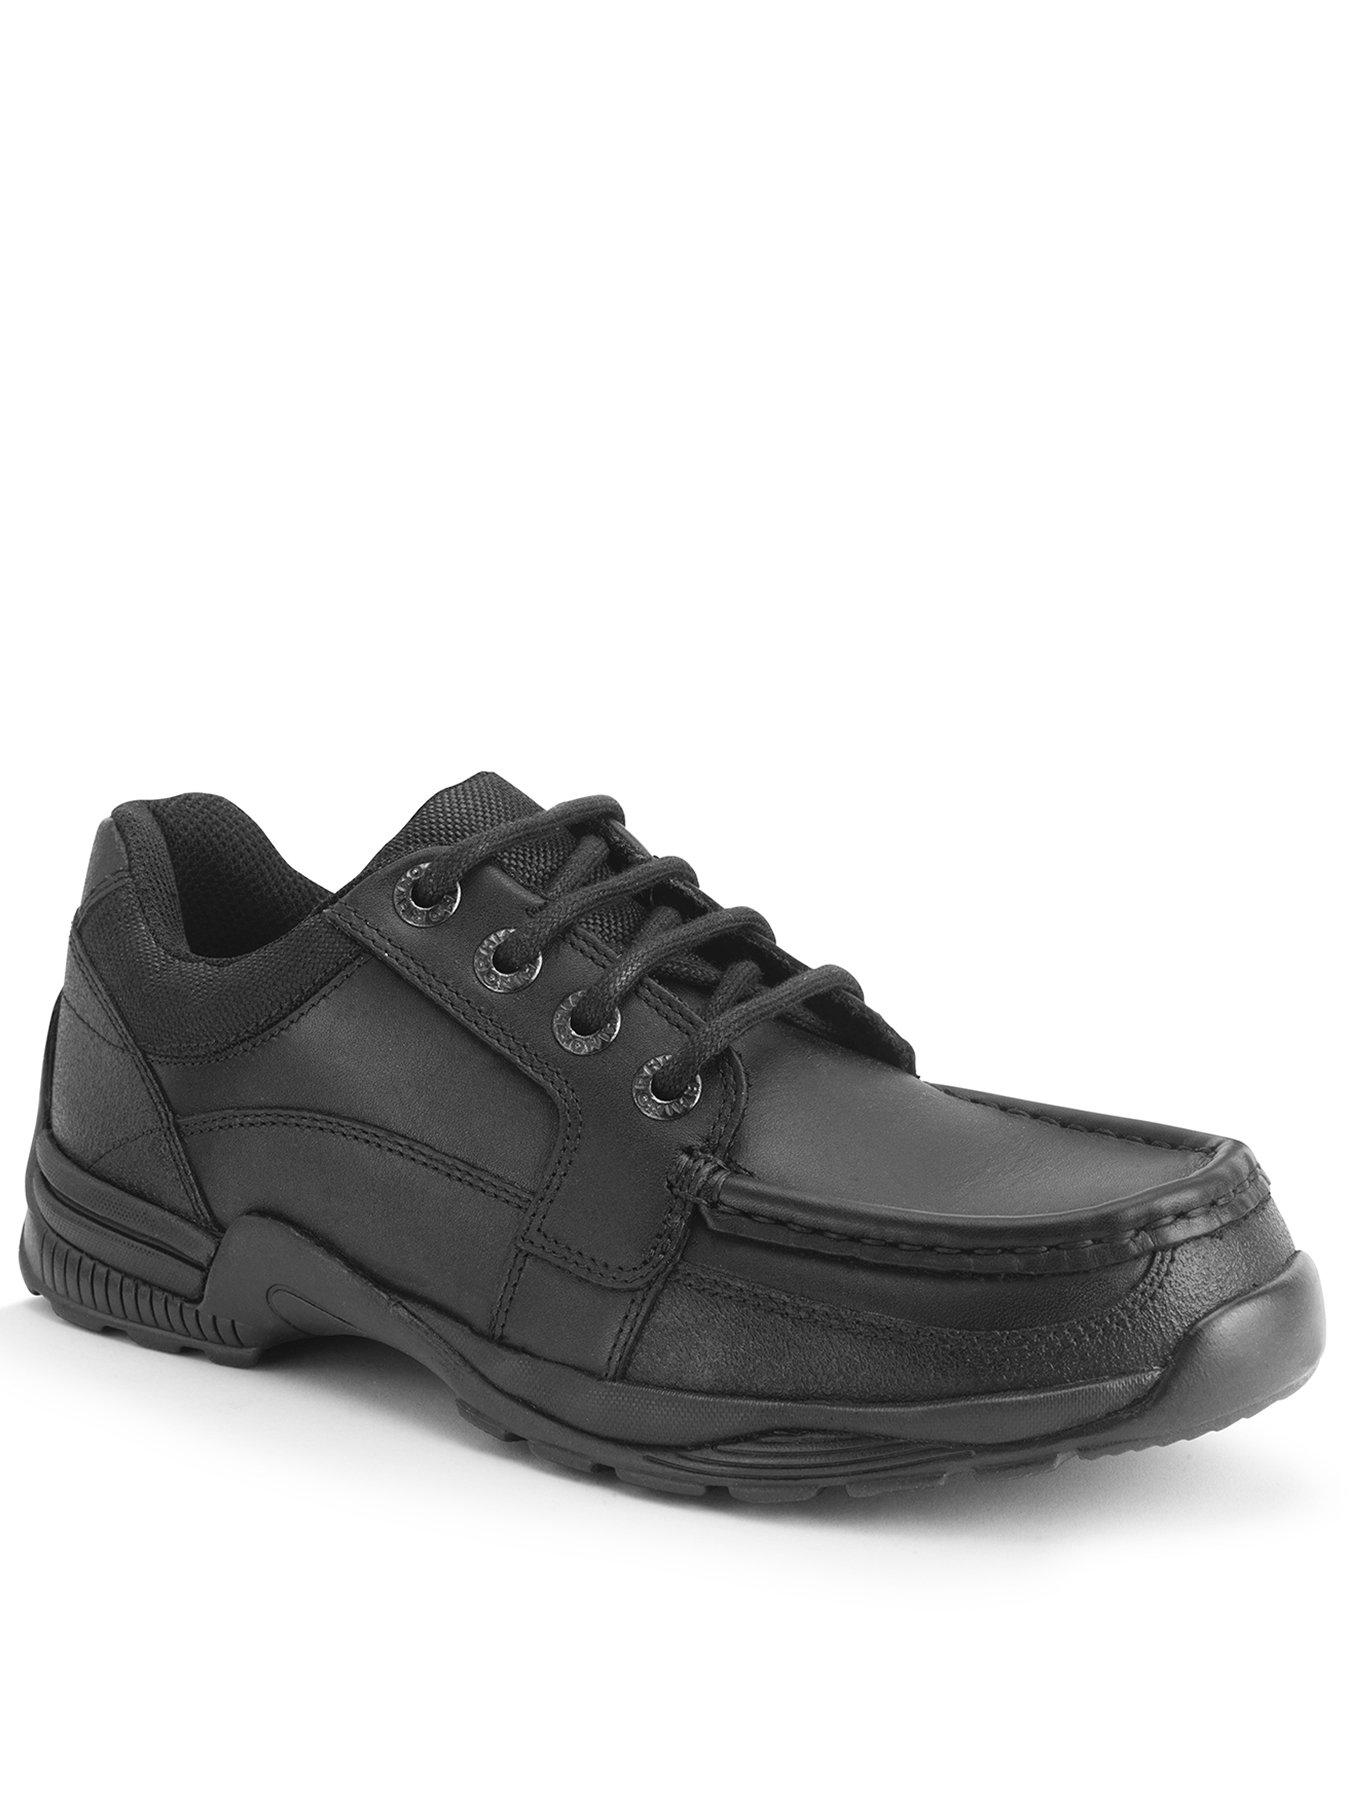  Boys Dylan School Shoes - Black Leather